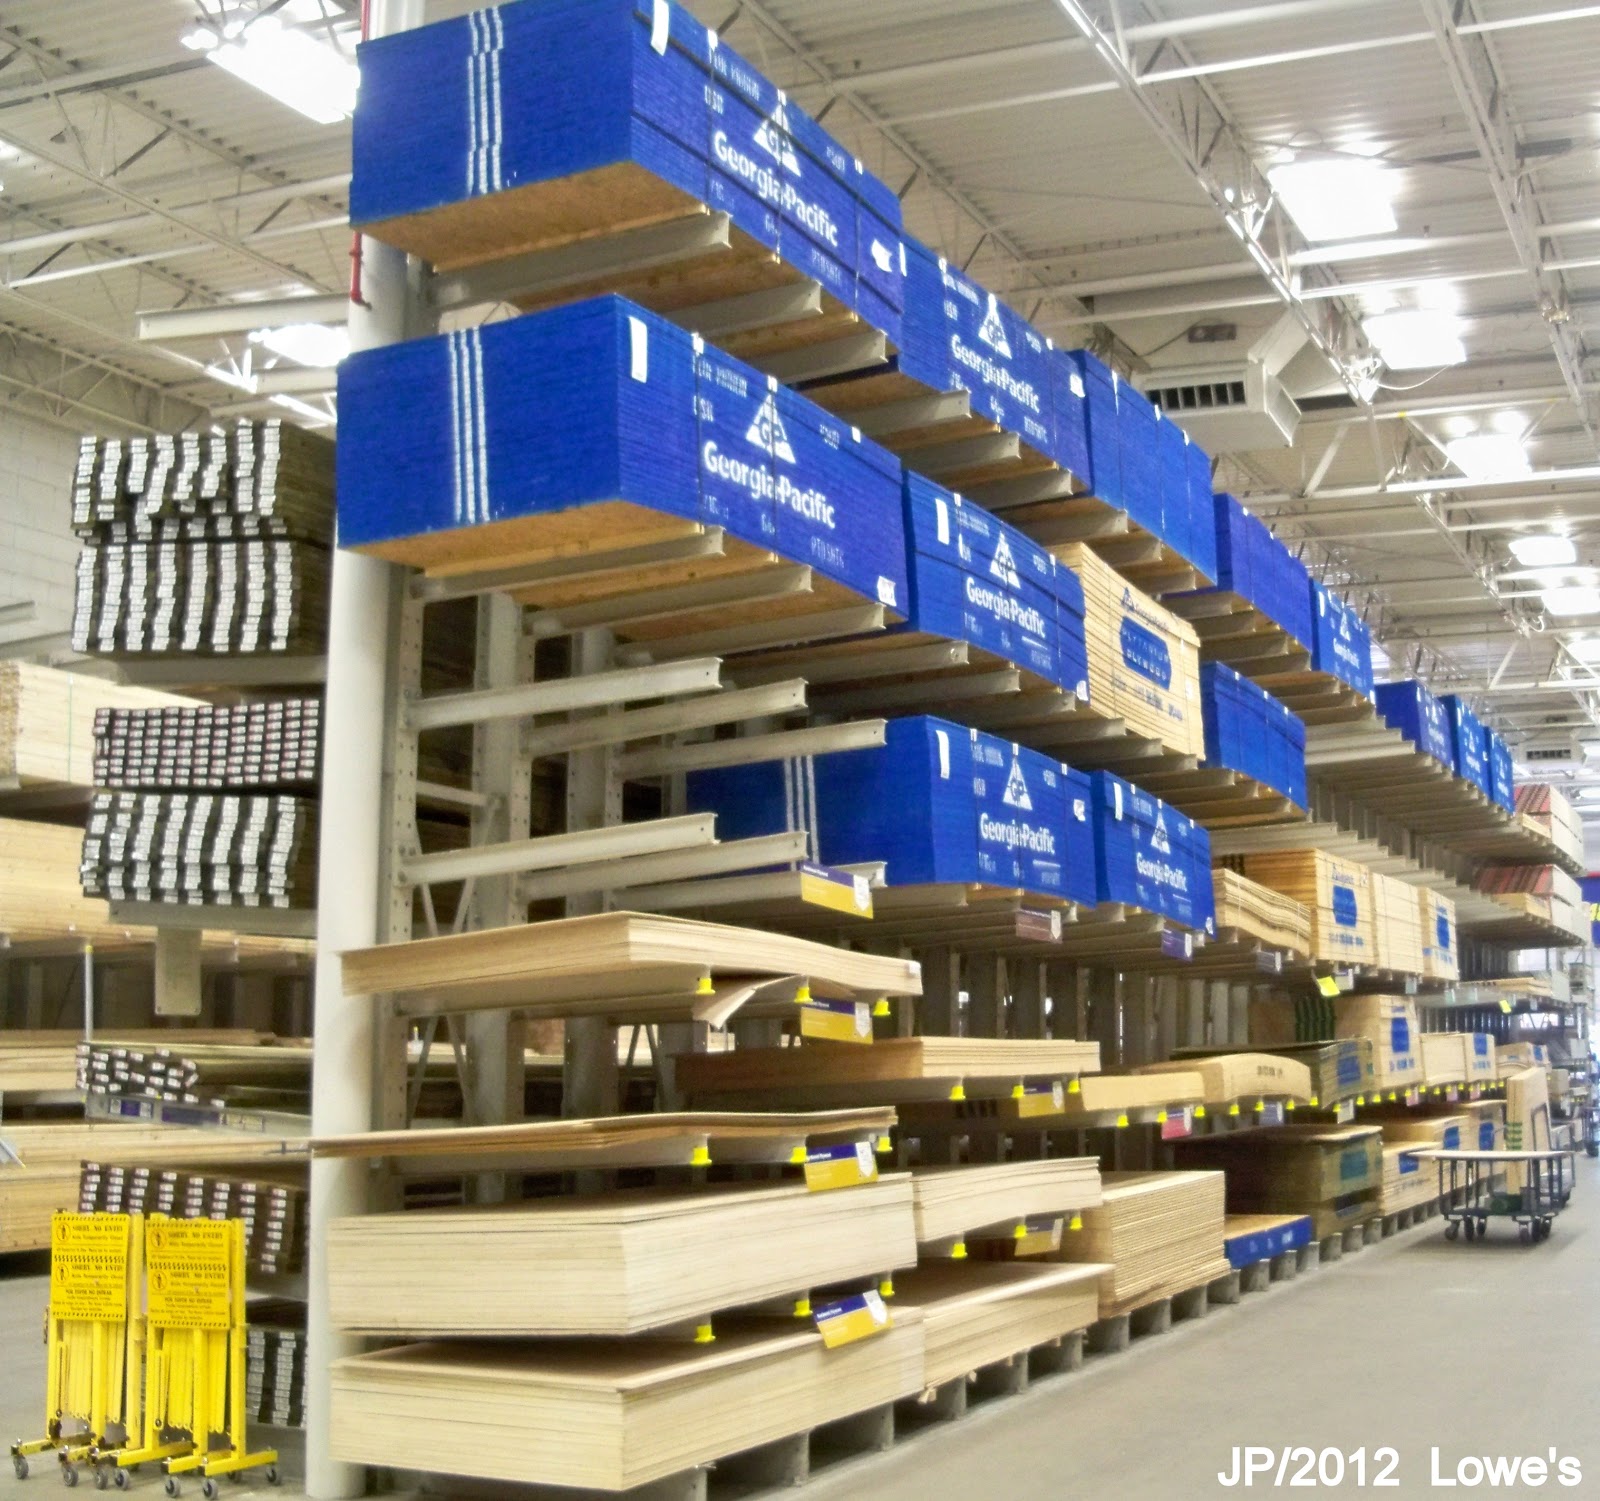 ... Store FL.: LOWE'S JACKSONVILLE FLORIDA Philips Hwy. Lowe's Home